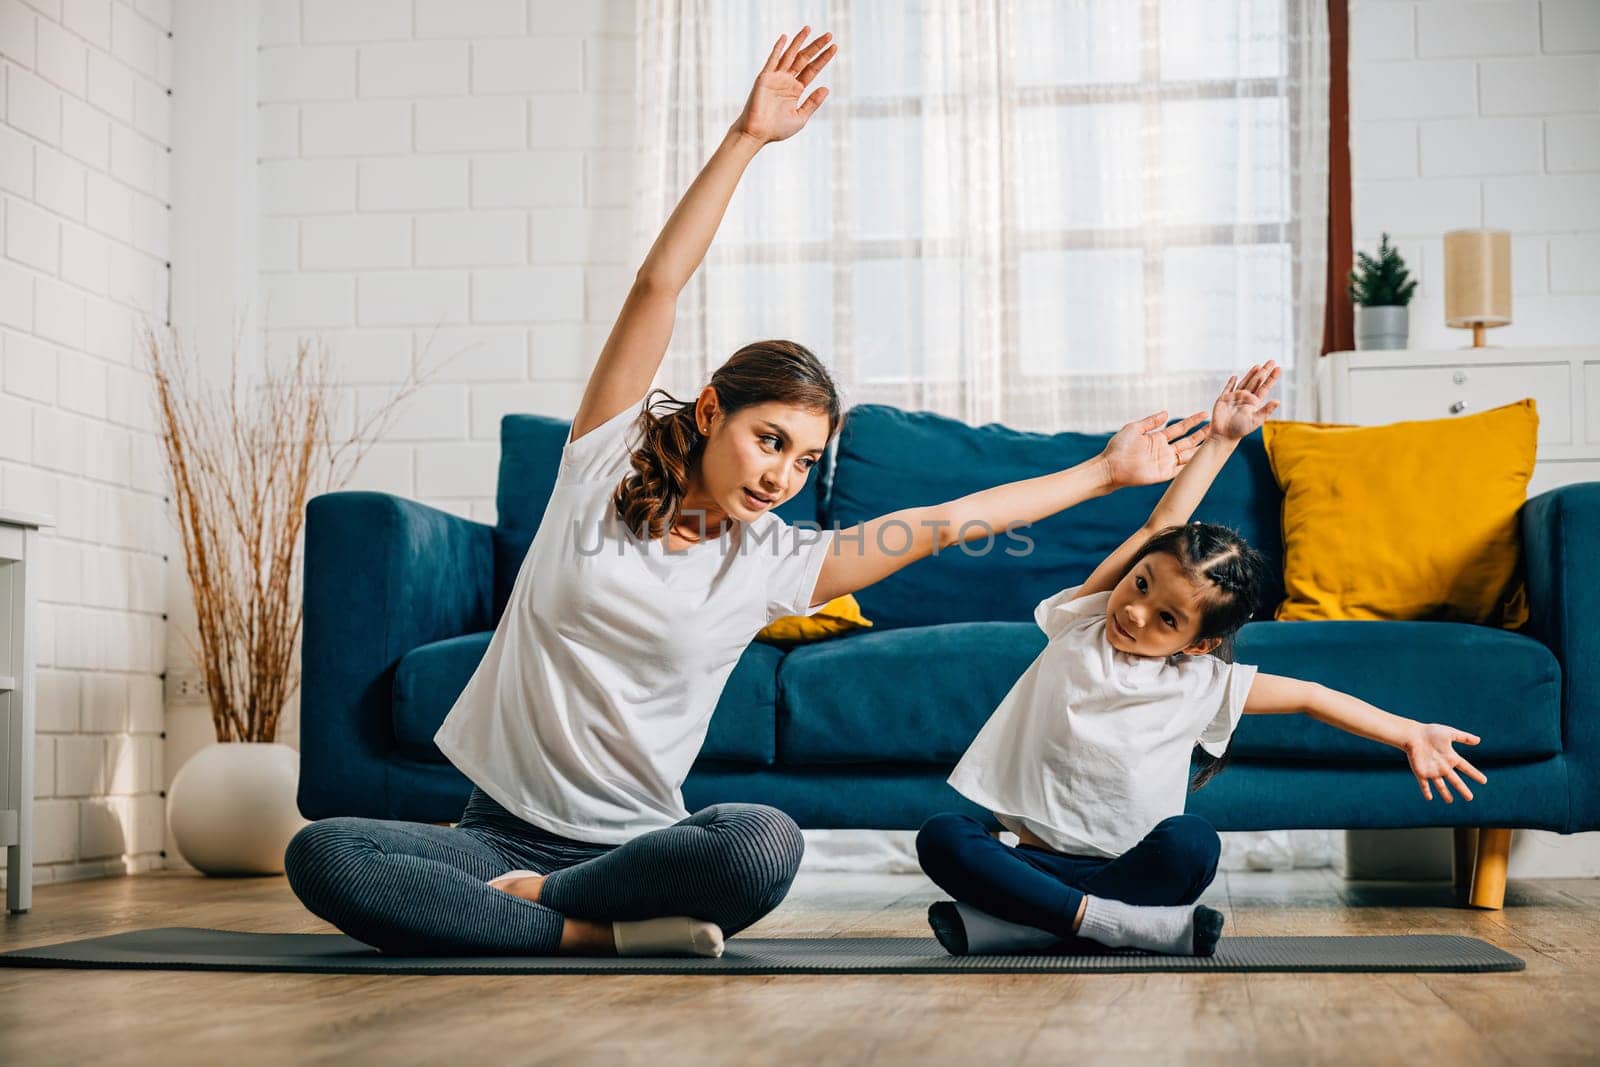 A mother teaches her daughter yoga focusing on stretch and balance in their home. Their smiles reflect the family's togetherness trust and joyful learning.